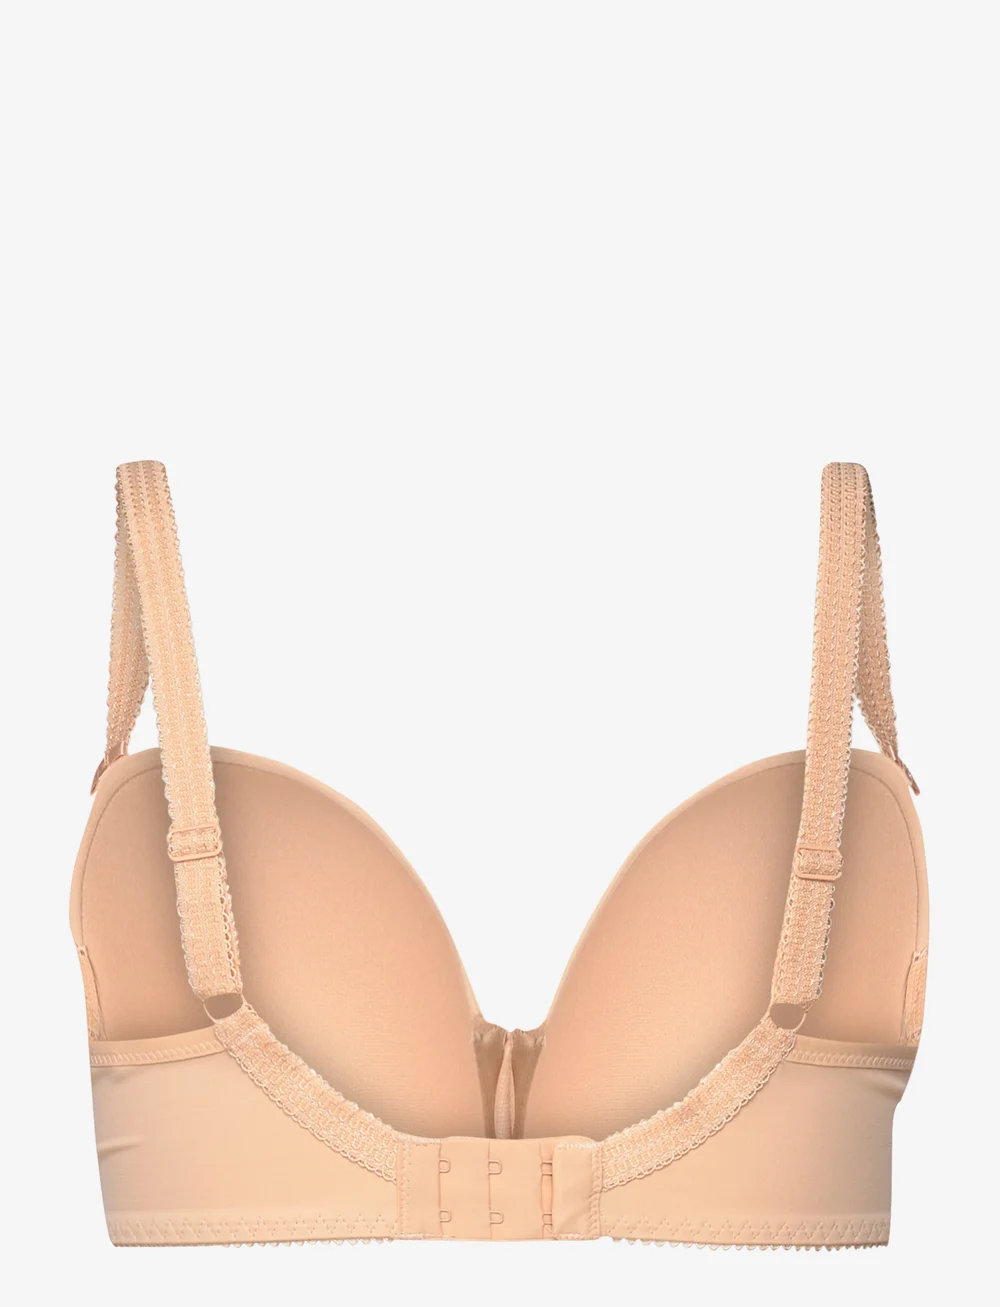 Deco Nude Moulded Plunge Bra from Freya